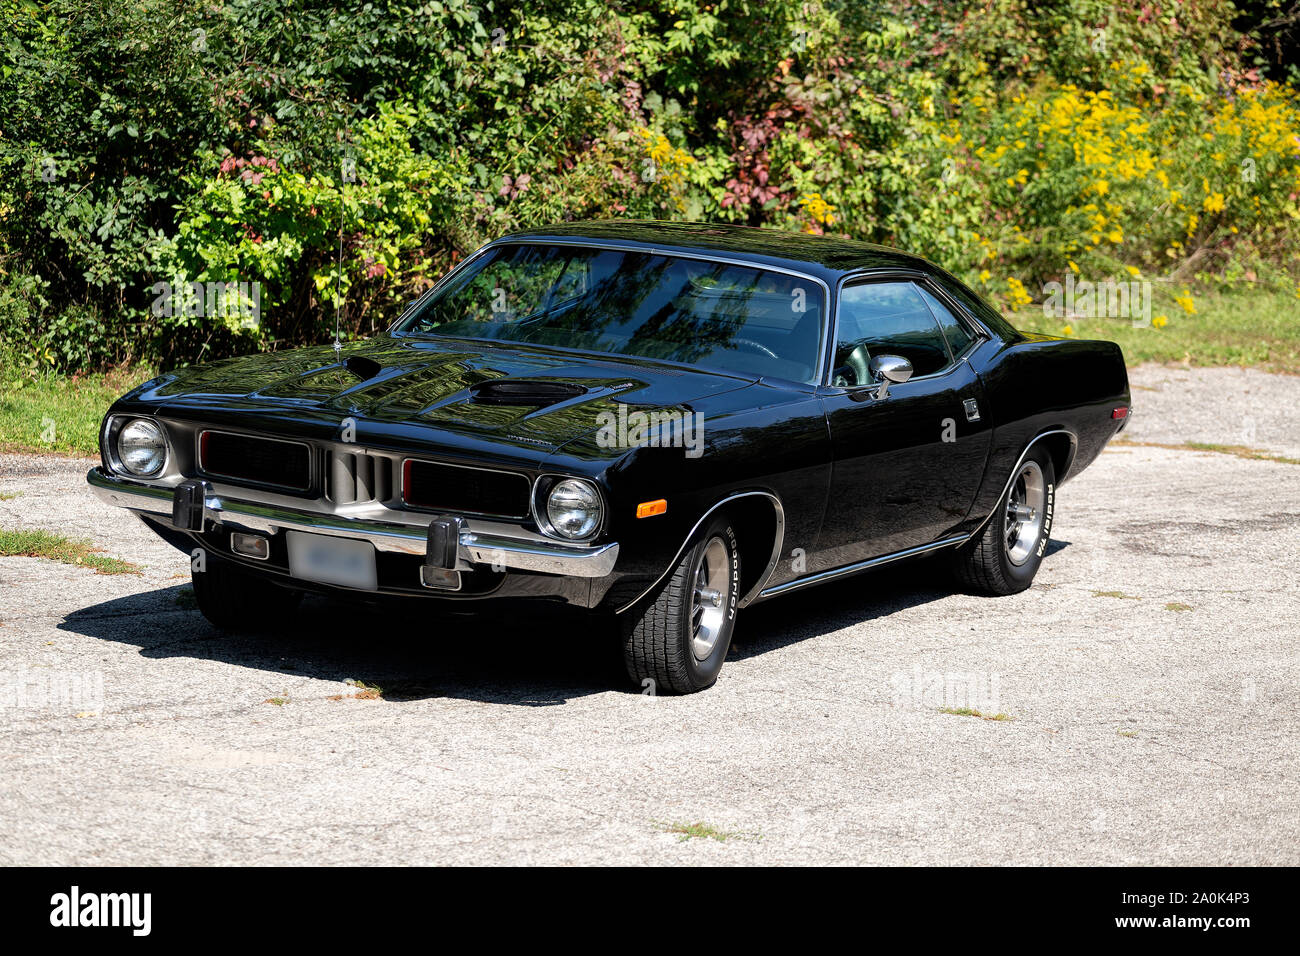 1973 Plymouth Barracuda on Pavement Stock Photo